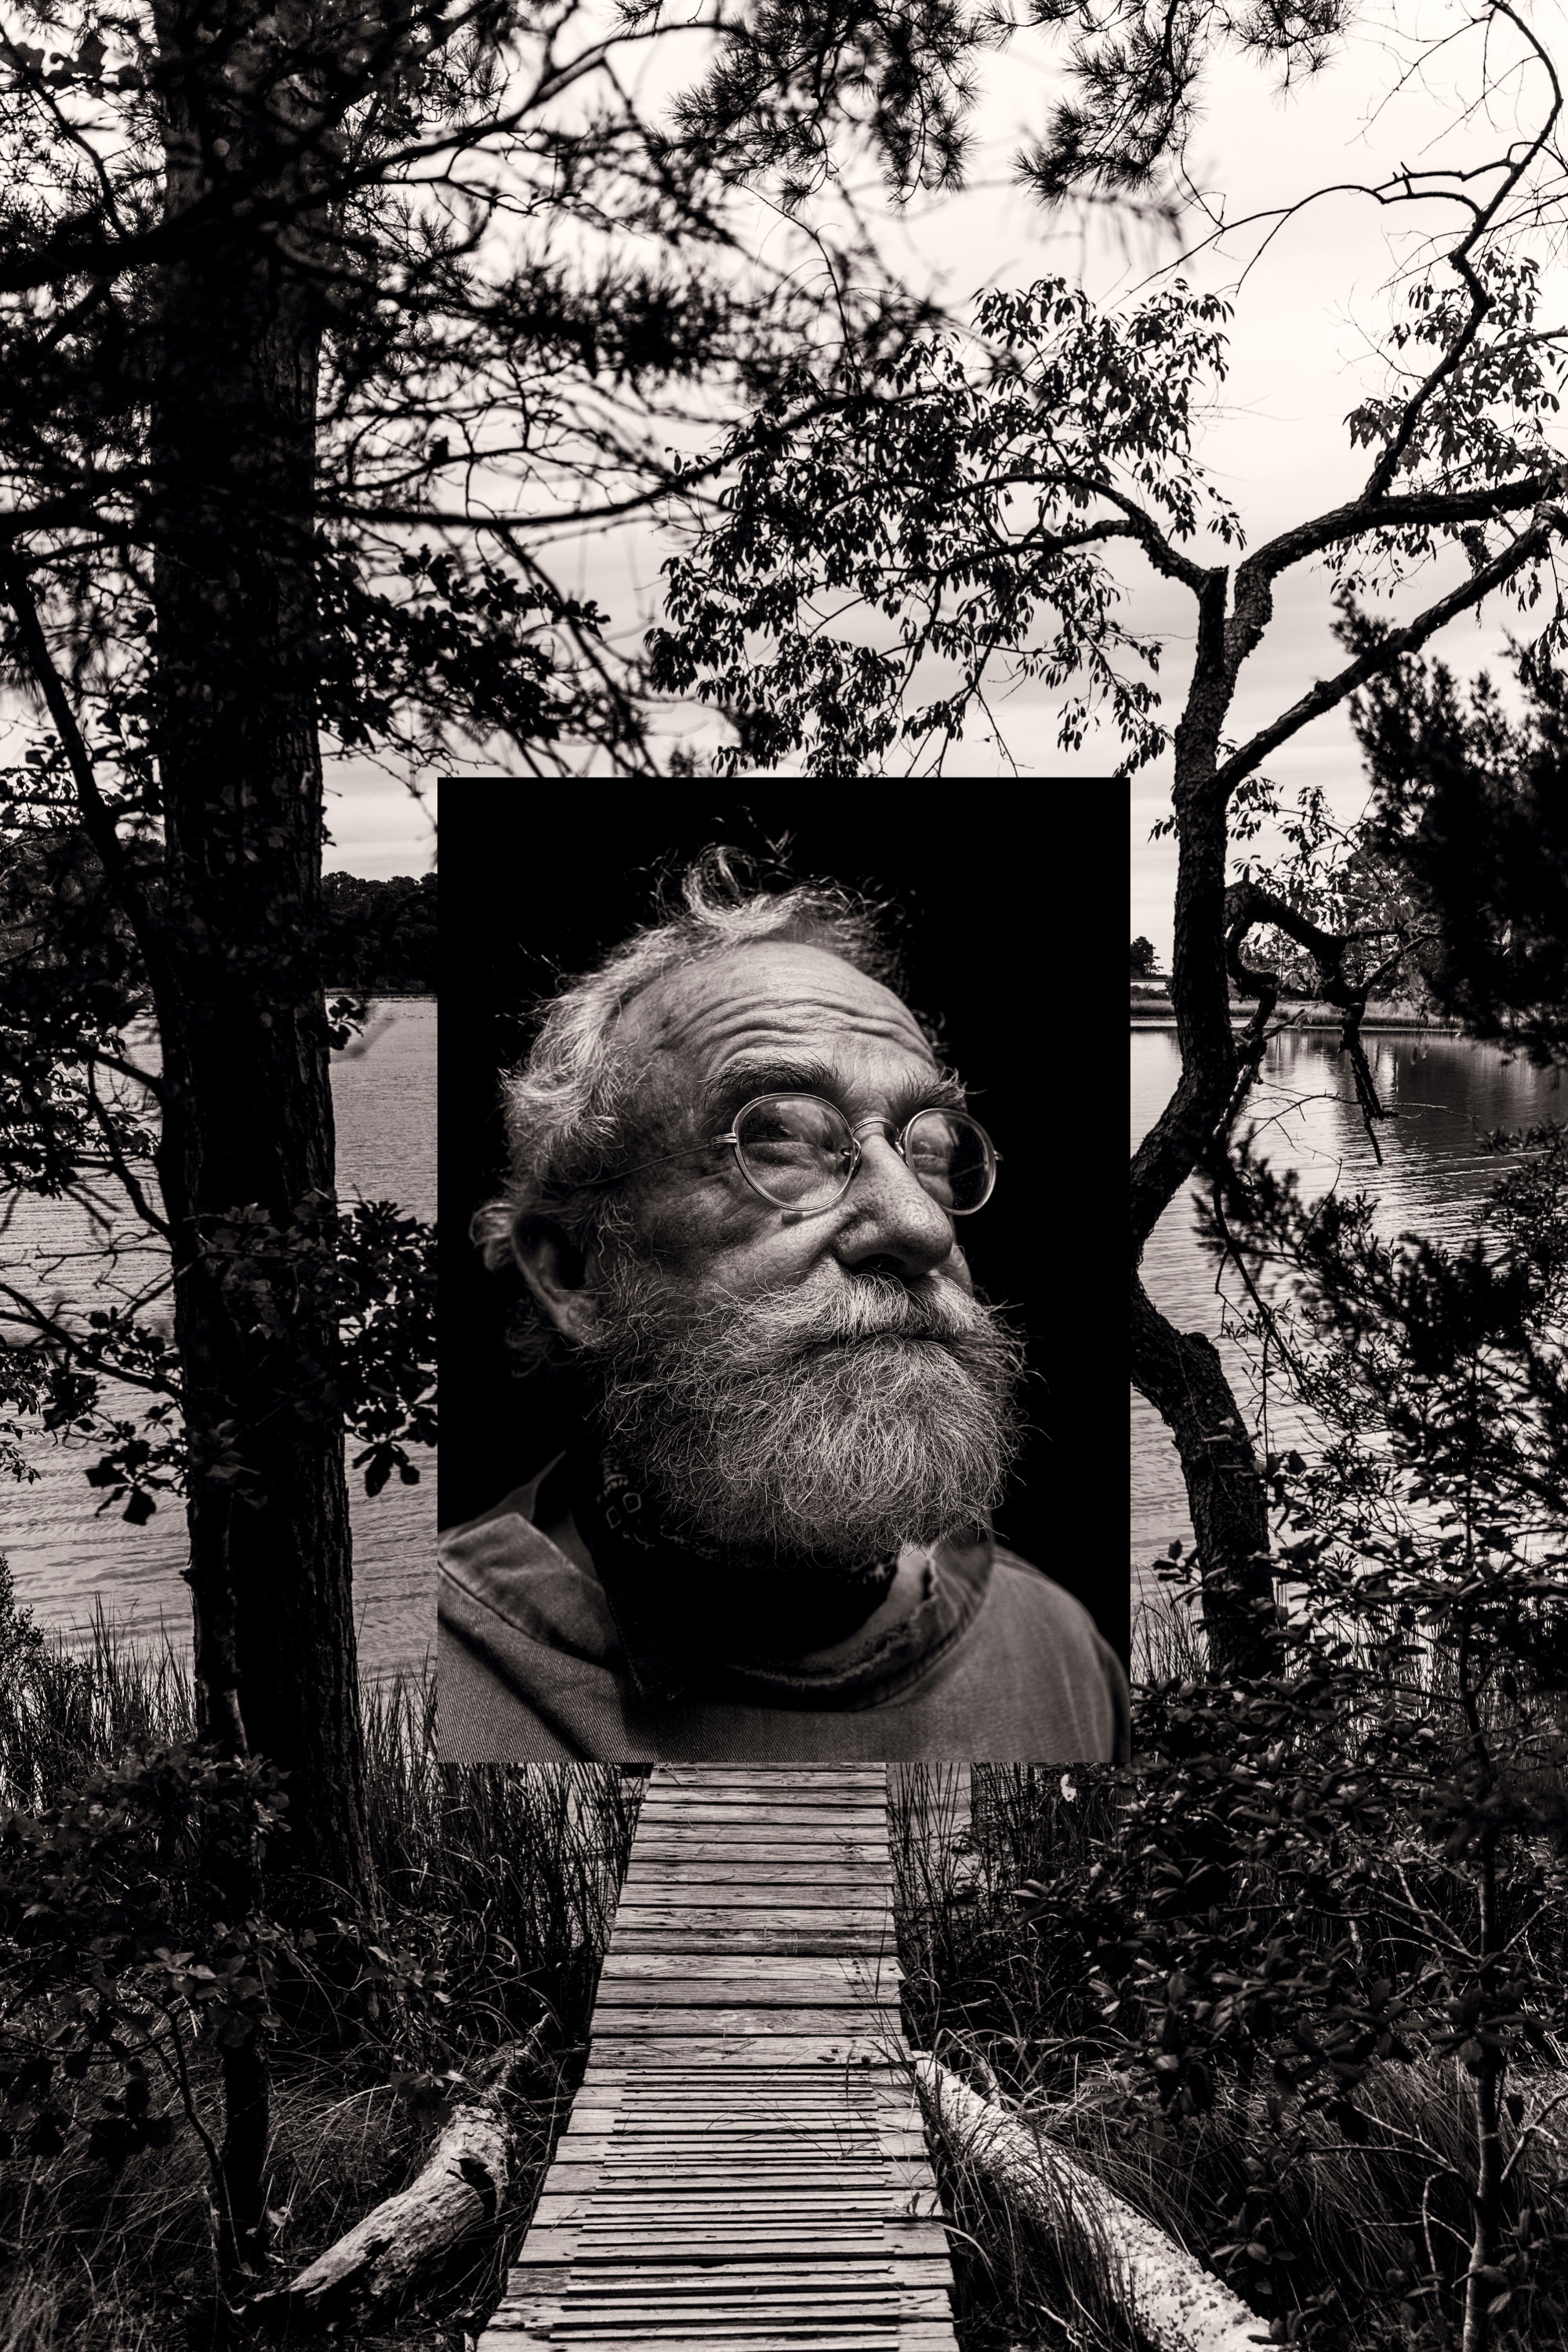 A photo of a dock with trees, with a portrait of an older man laid over the image